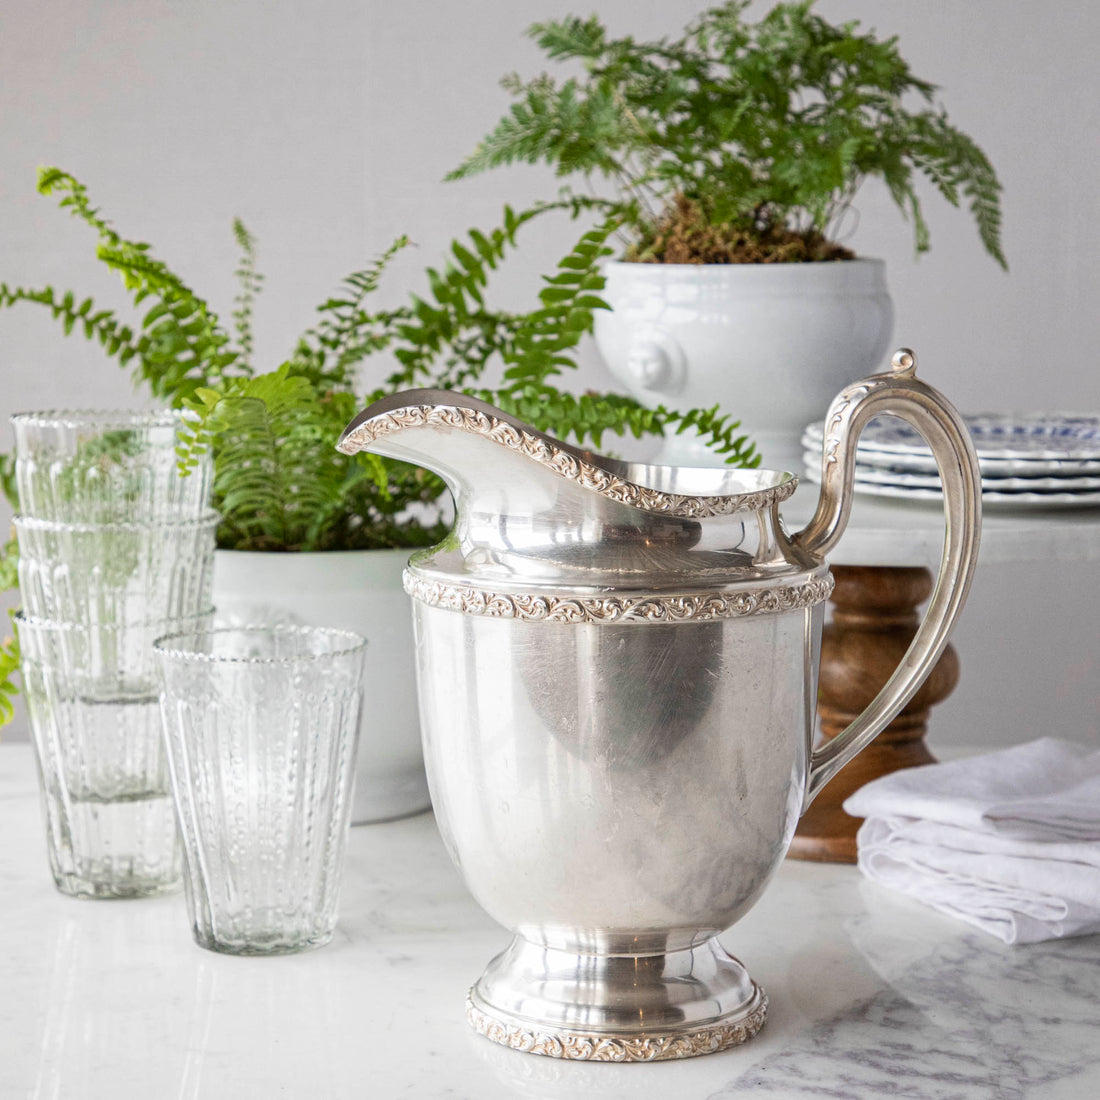 Elegant Hester &amp; Cook vintage silver-plate water pitcher on a table adorned with glasses, plates, and a potted fern in the background.